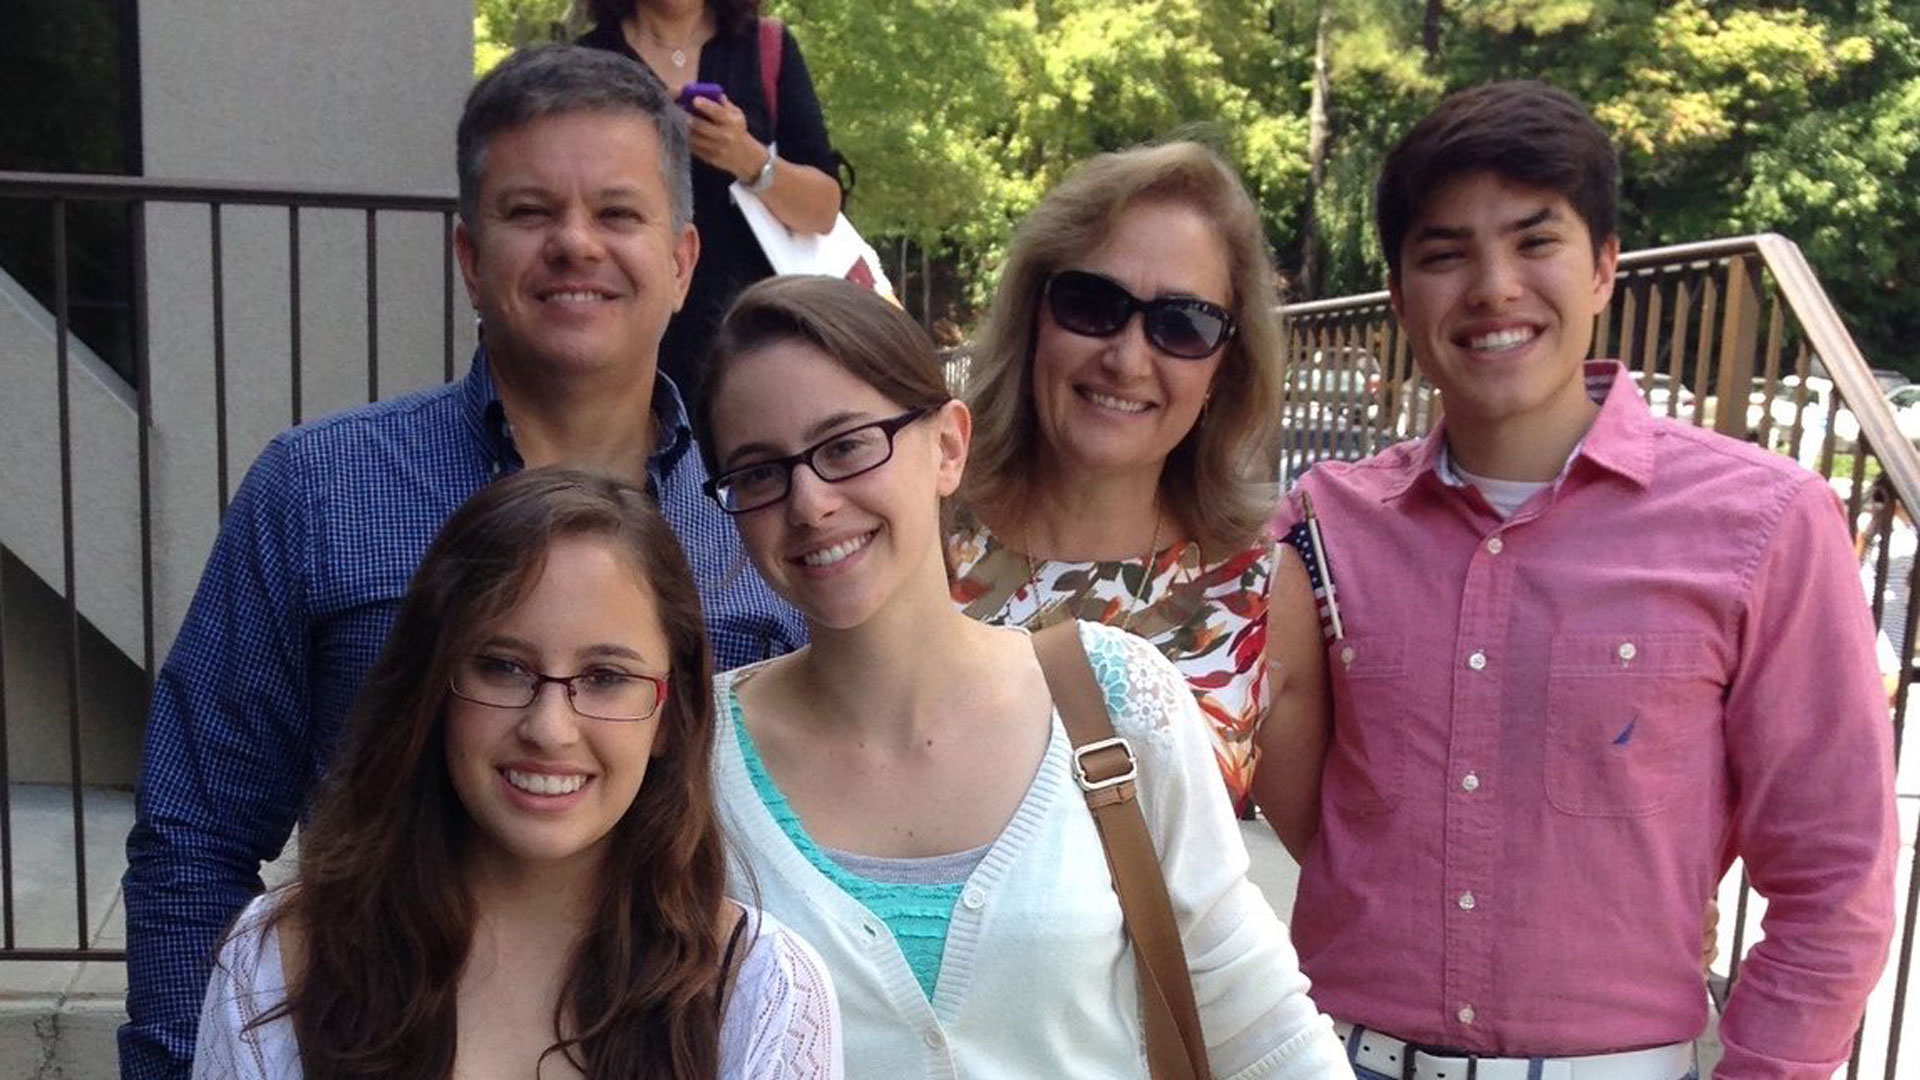 The Carrasquilla family (Laura in front with blue dress, Tatiana with green dress, Juan with salmon shirt in the back, their father Carlos in the blue shirt and mom Liliana wearing sunglasses) at their U.S. citizen naturalization ceremony in 2016.